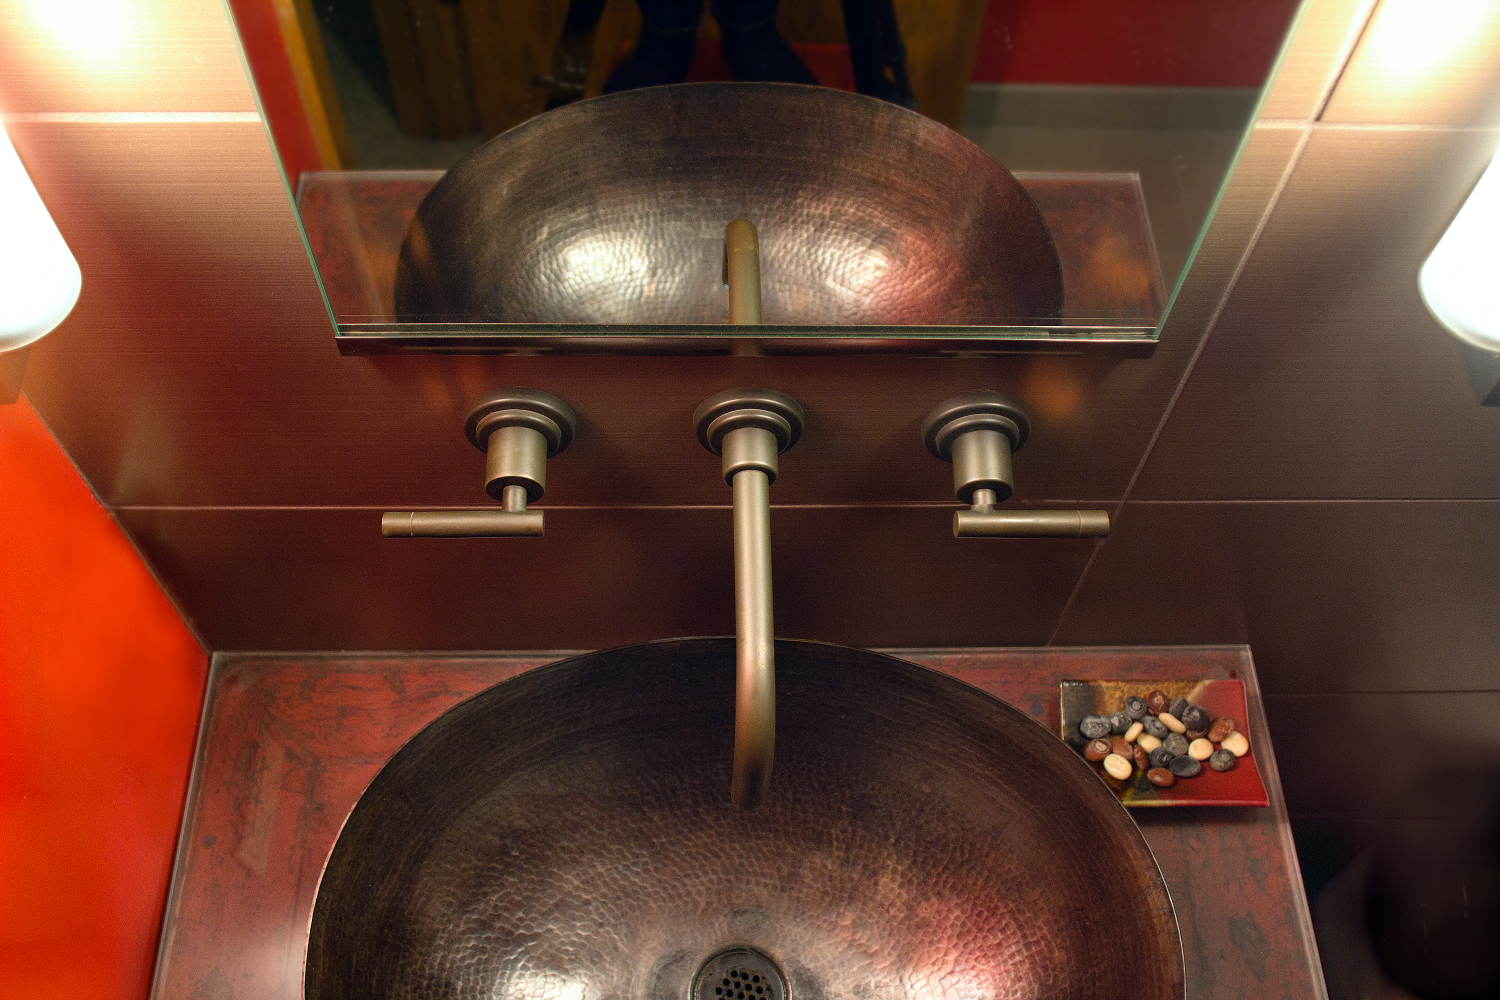 A top view of the copper sink